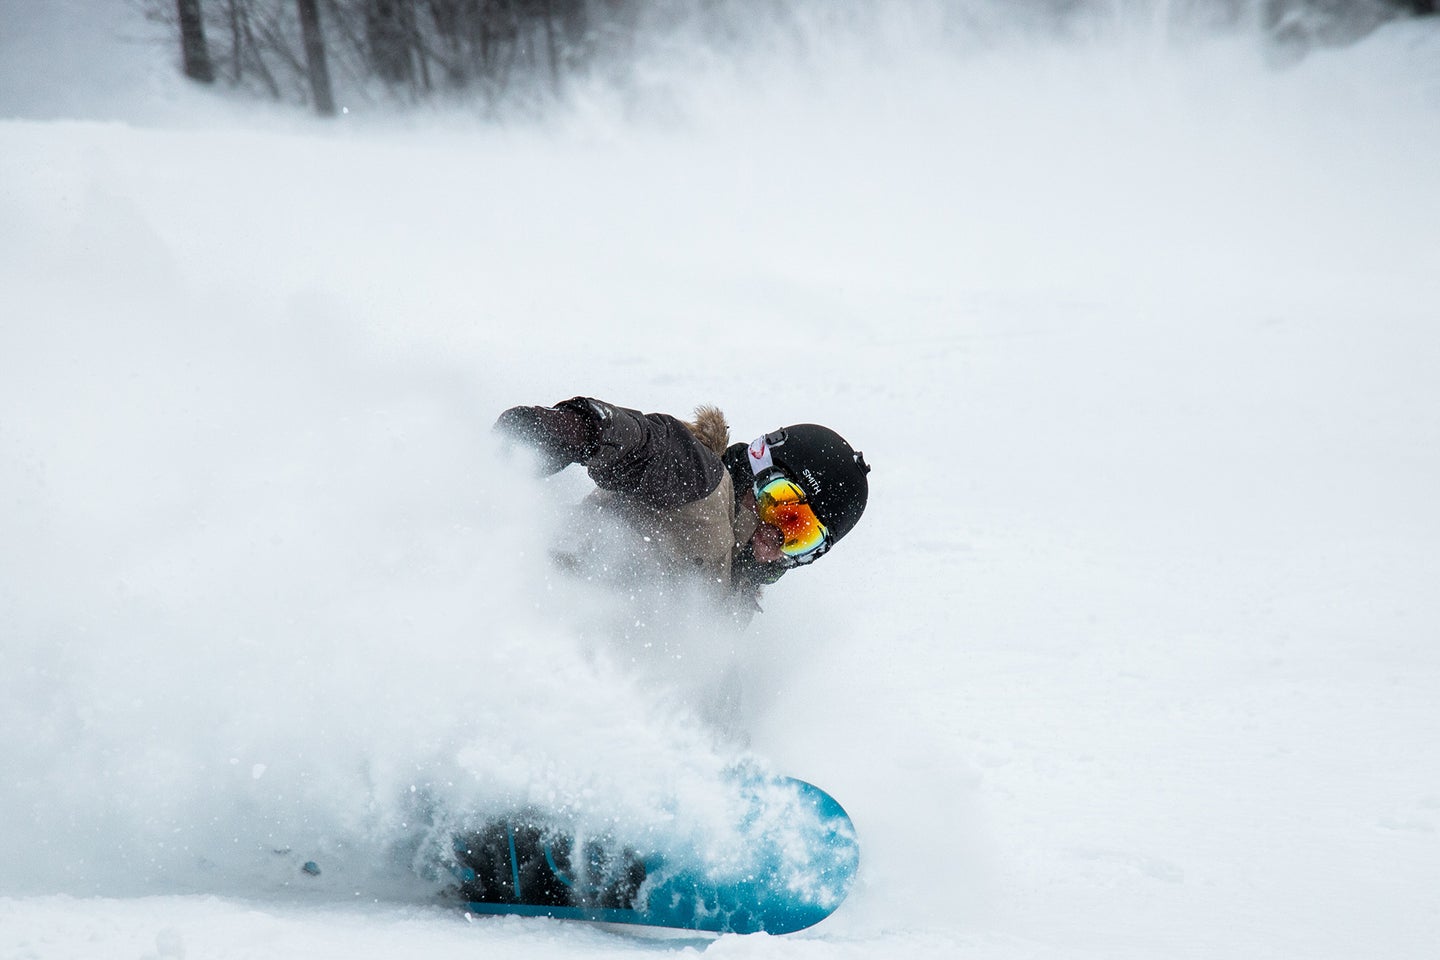 person snowboarding with helmet and the best snowboard goggles and carving through some snow